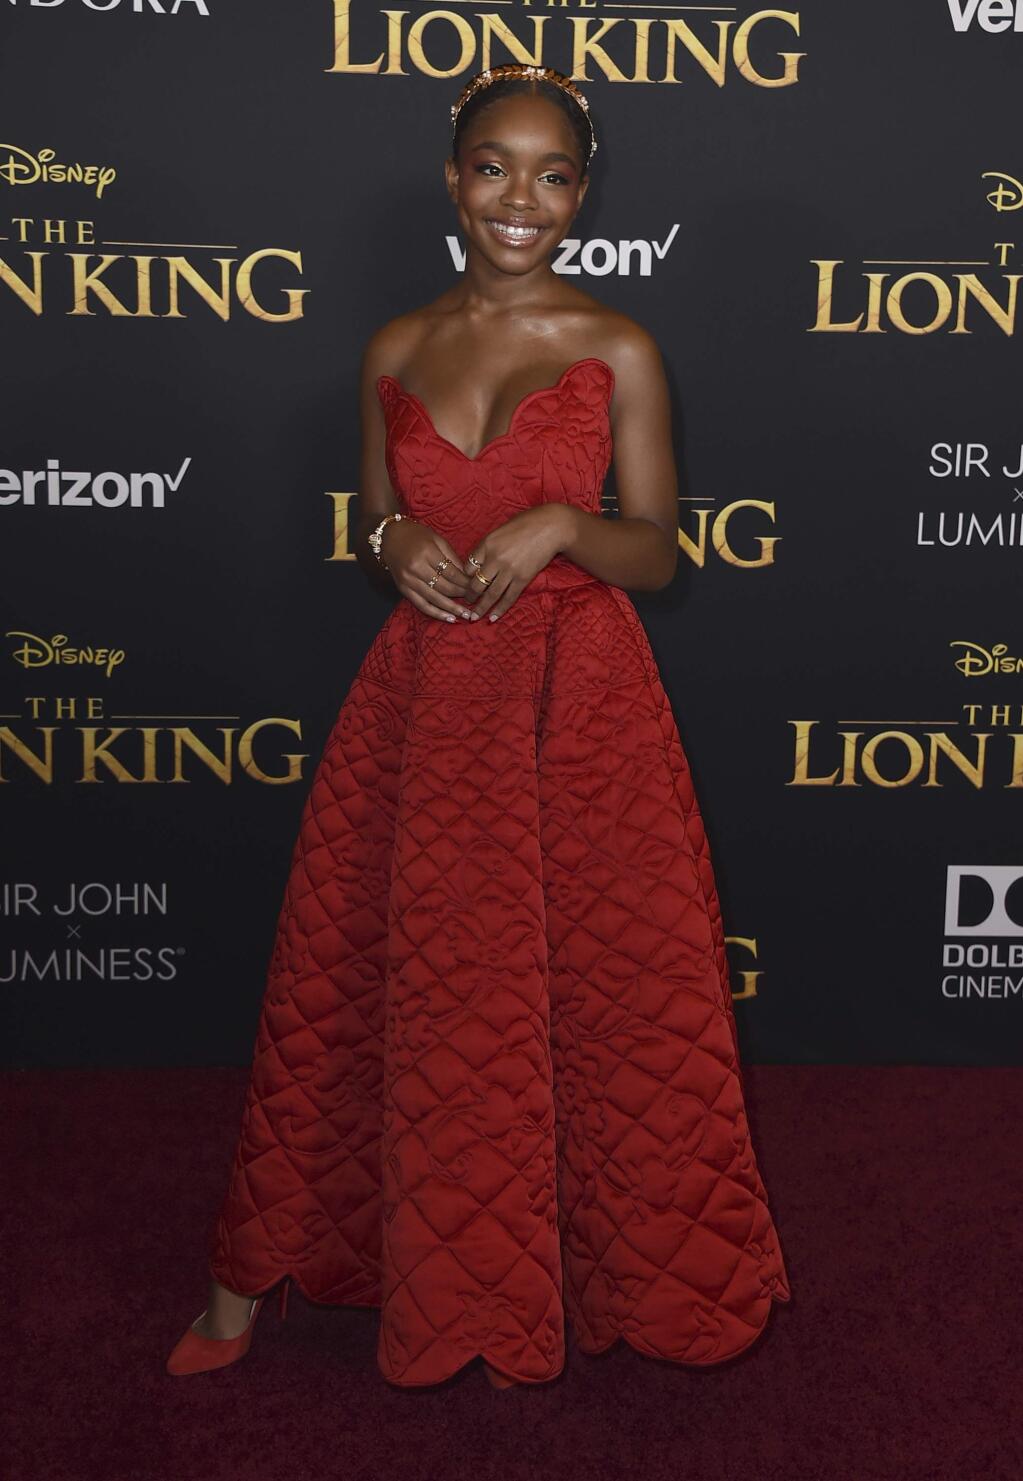 Marsai Martin arrives at the world premiere of 'The Lion King' on Tuesday, July 9, 2019, at the Dolby Theatre in Los Angeles. (Photo by Jordan Strauss/Invision/AP)